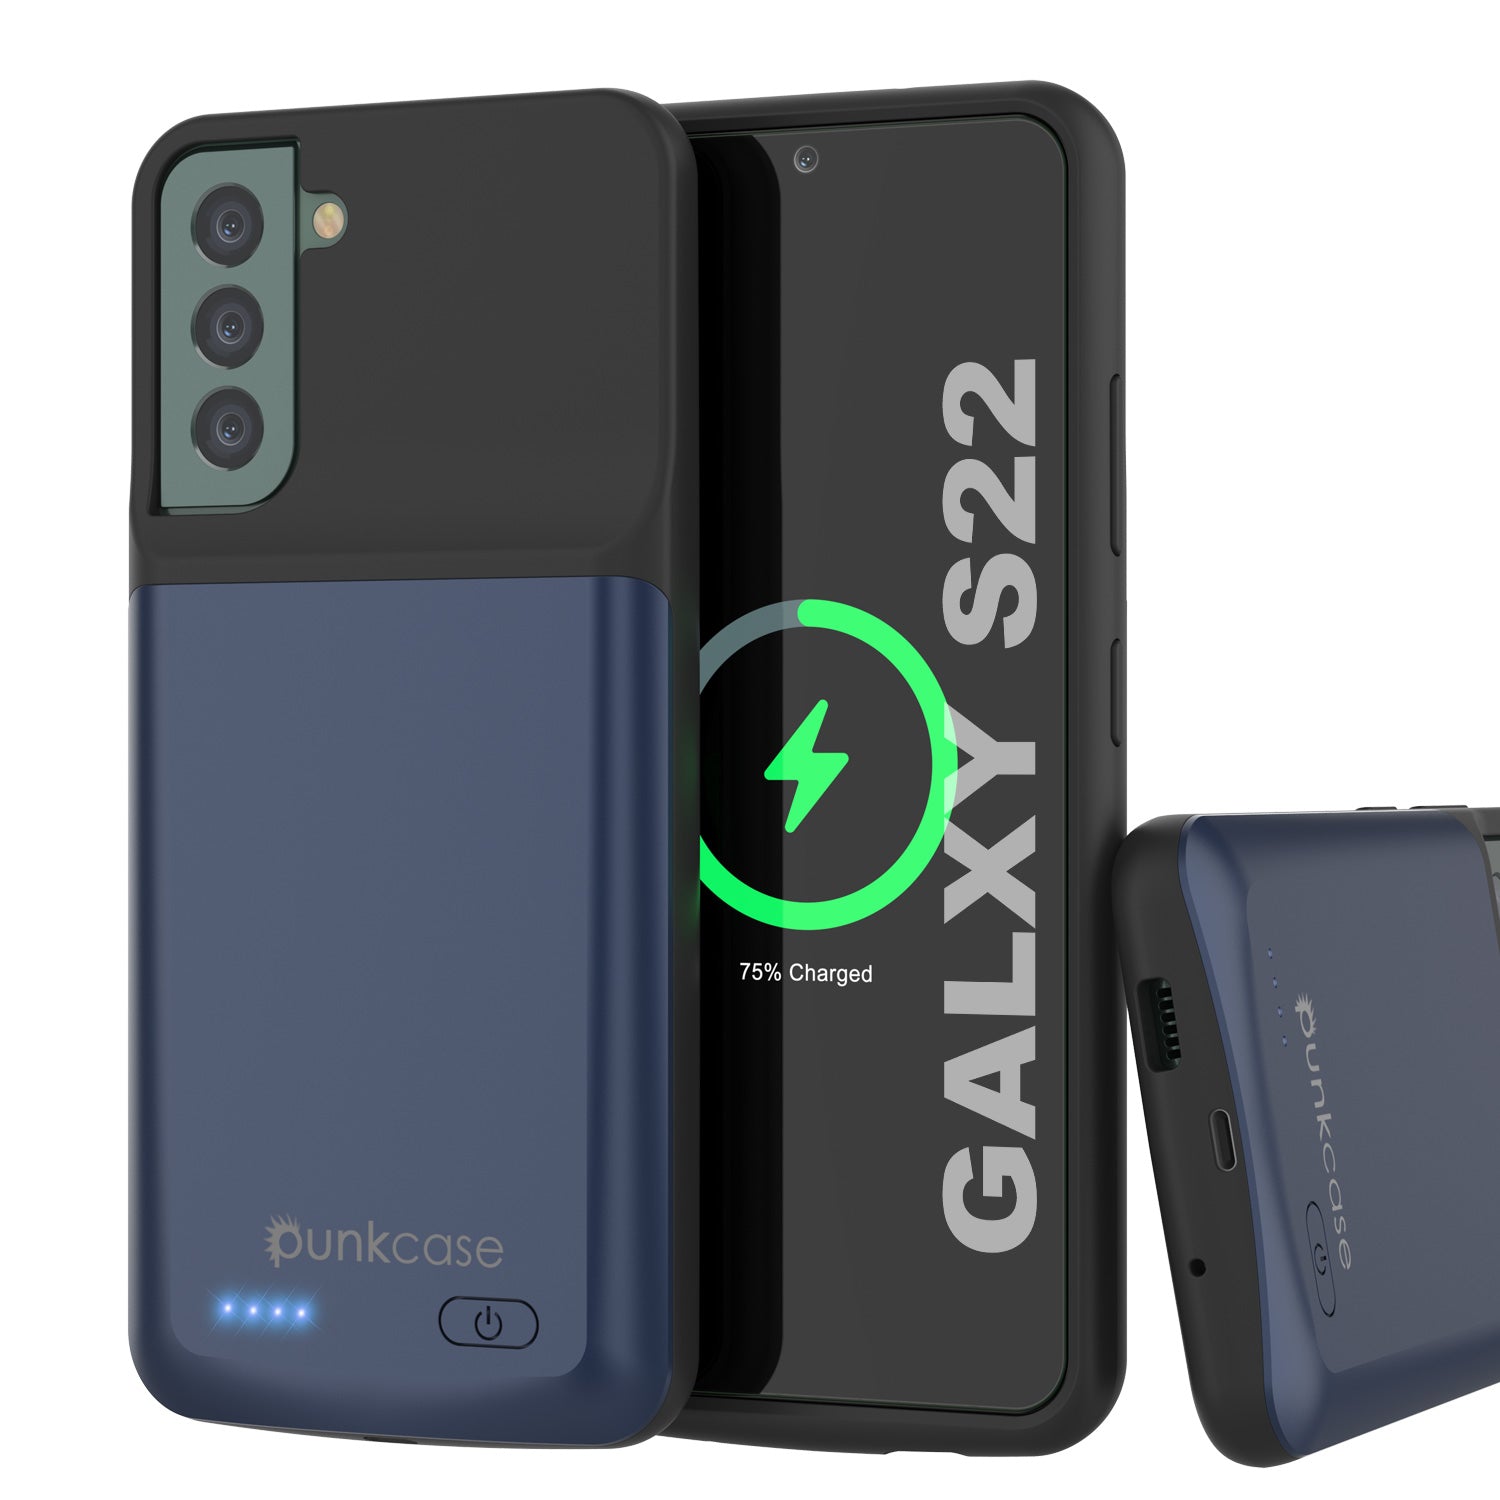 PunkJuice S22 Battery Case Blue - Portable Charging Power Juice Bank with 4700mAh